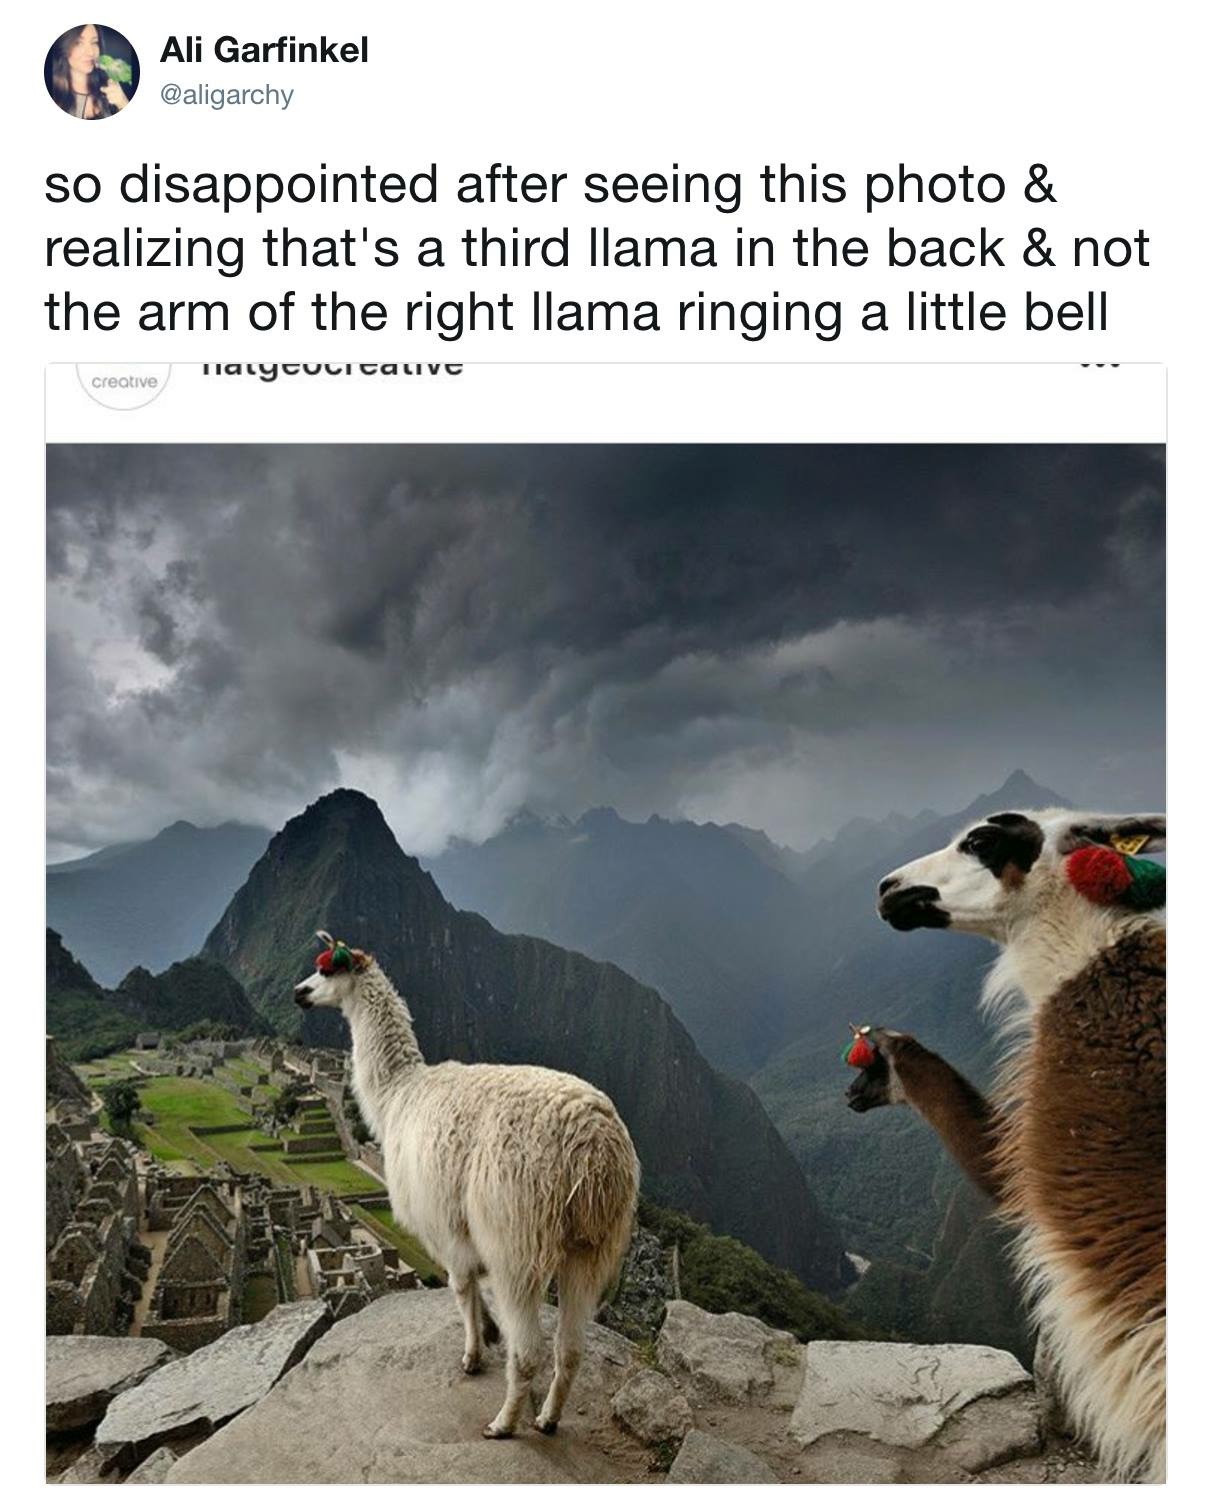 llama ringing bell - Ali Garfinkel so disappointed after seeing this photo & realizing that's a third llama in the back & not the arm of the right llama ringing a little bell Creative hay oui cauve